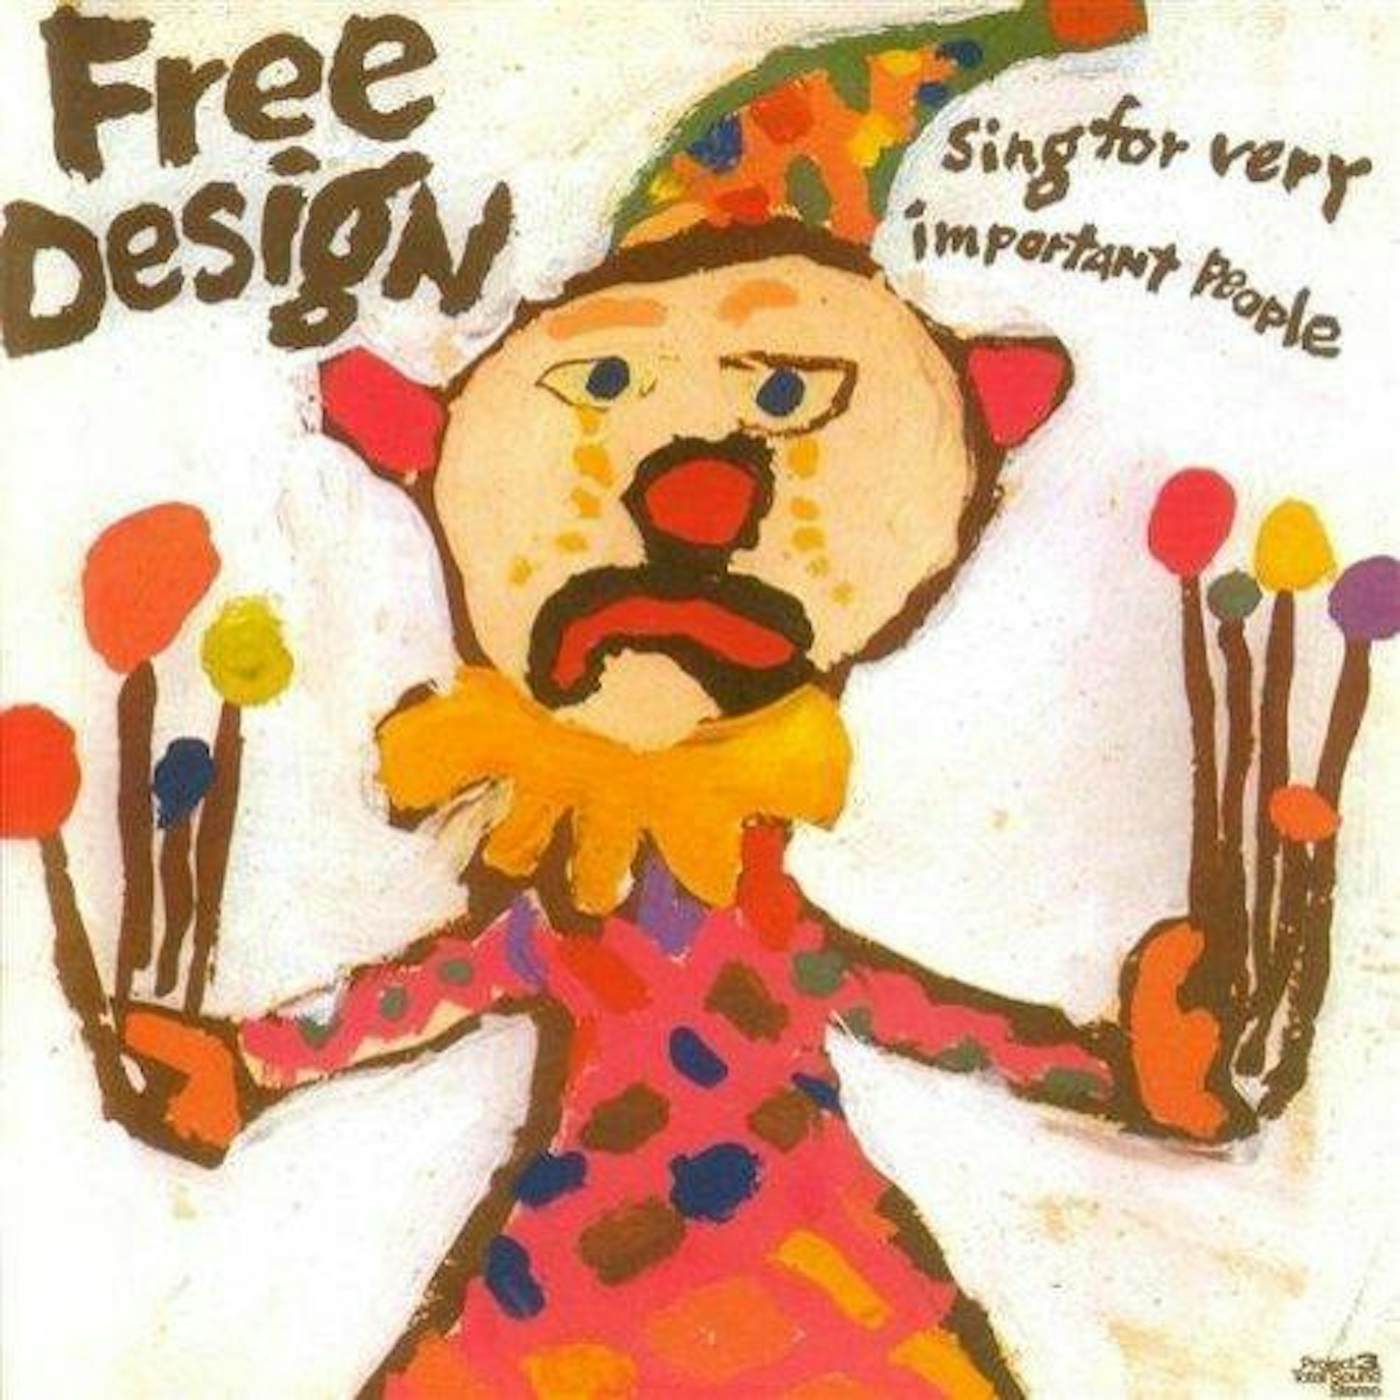 The Free Design SING FOR VERY IMPORTANT PEOPELE CD